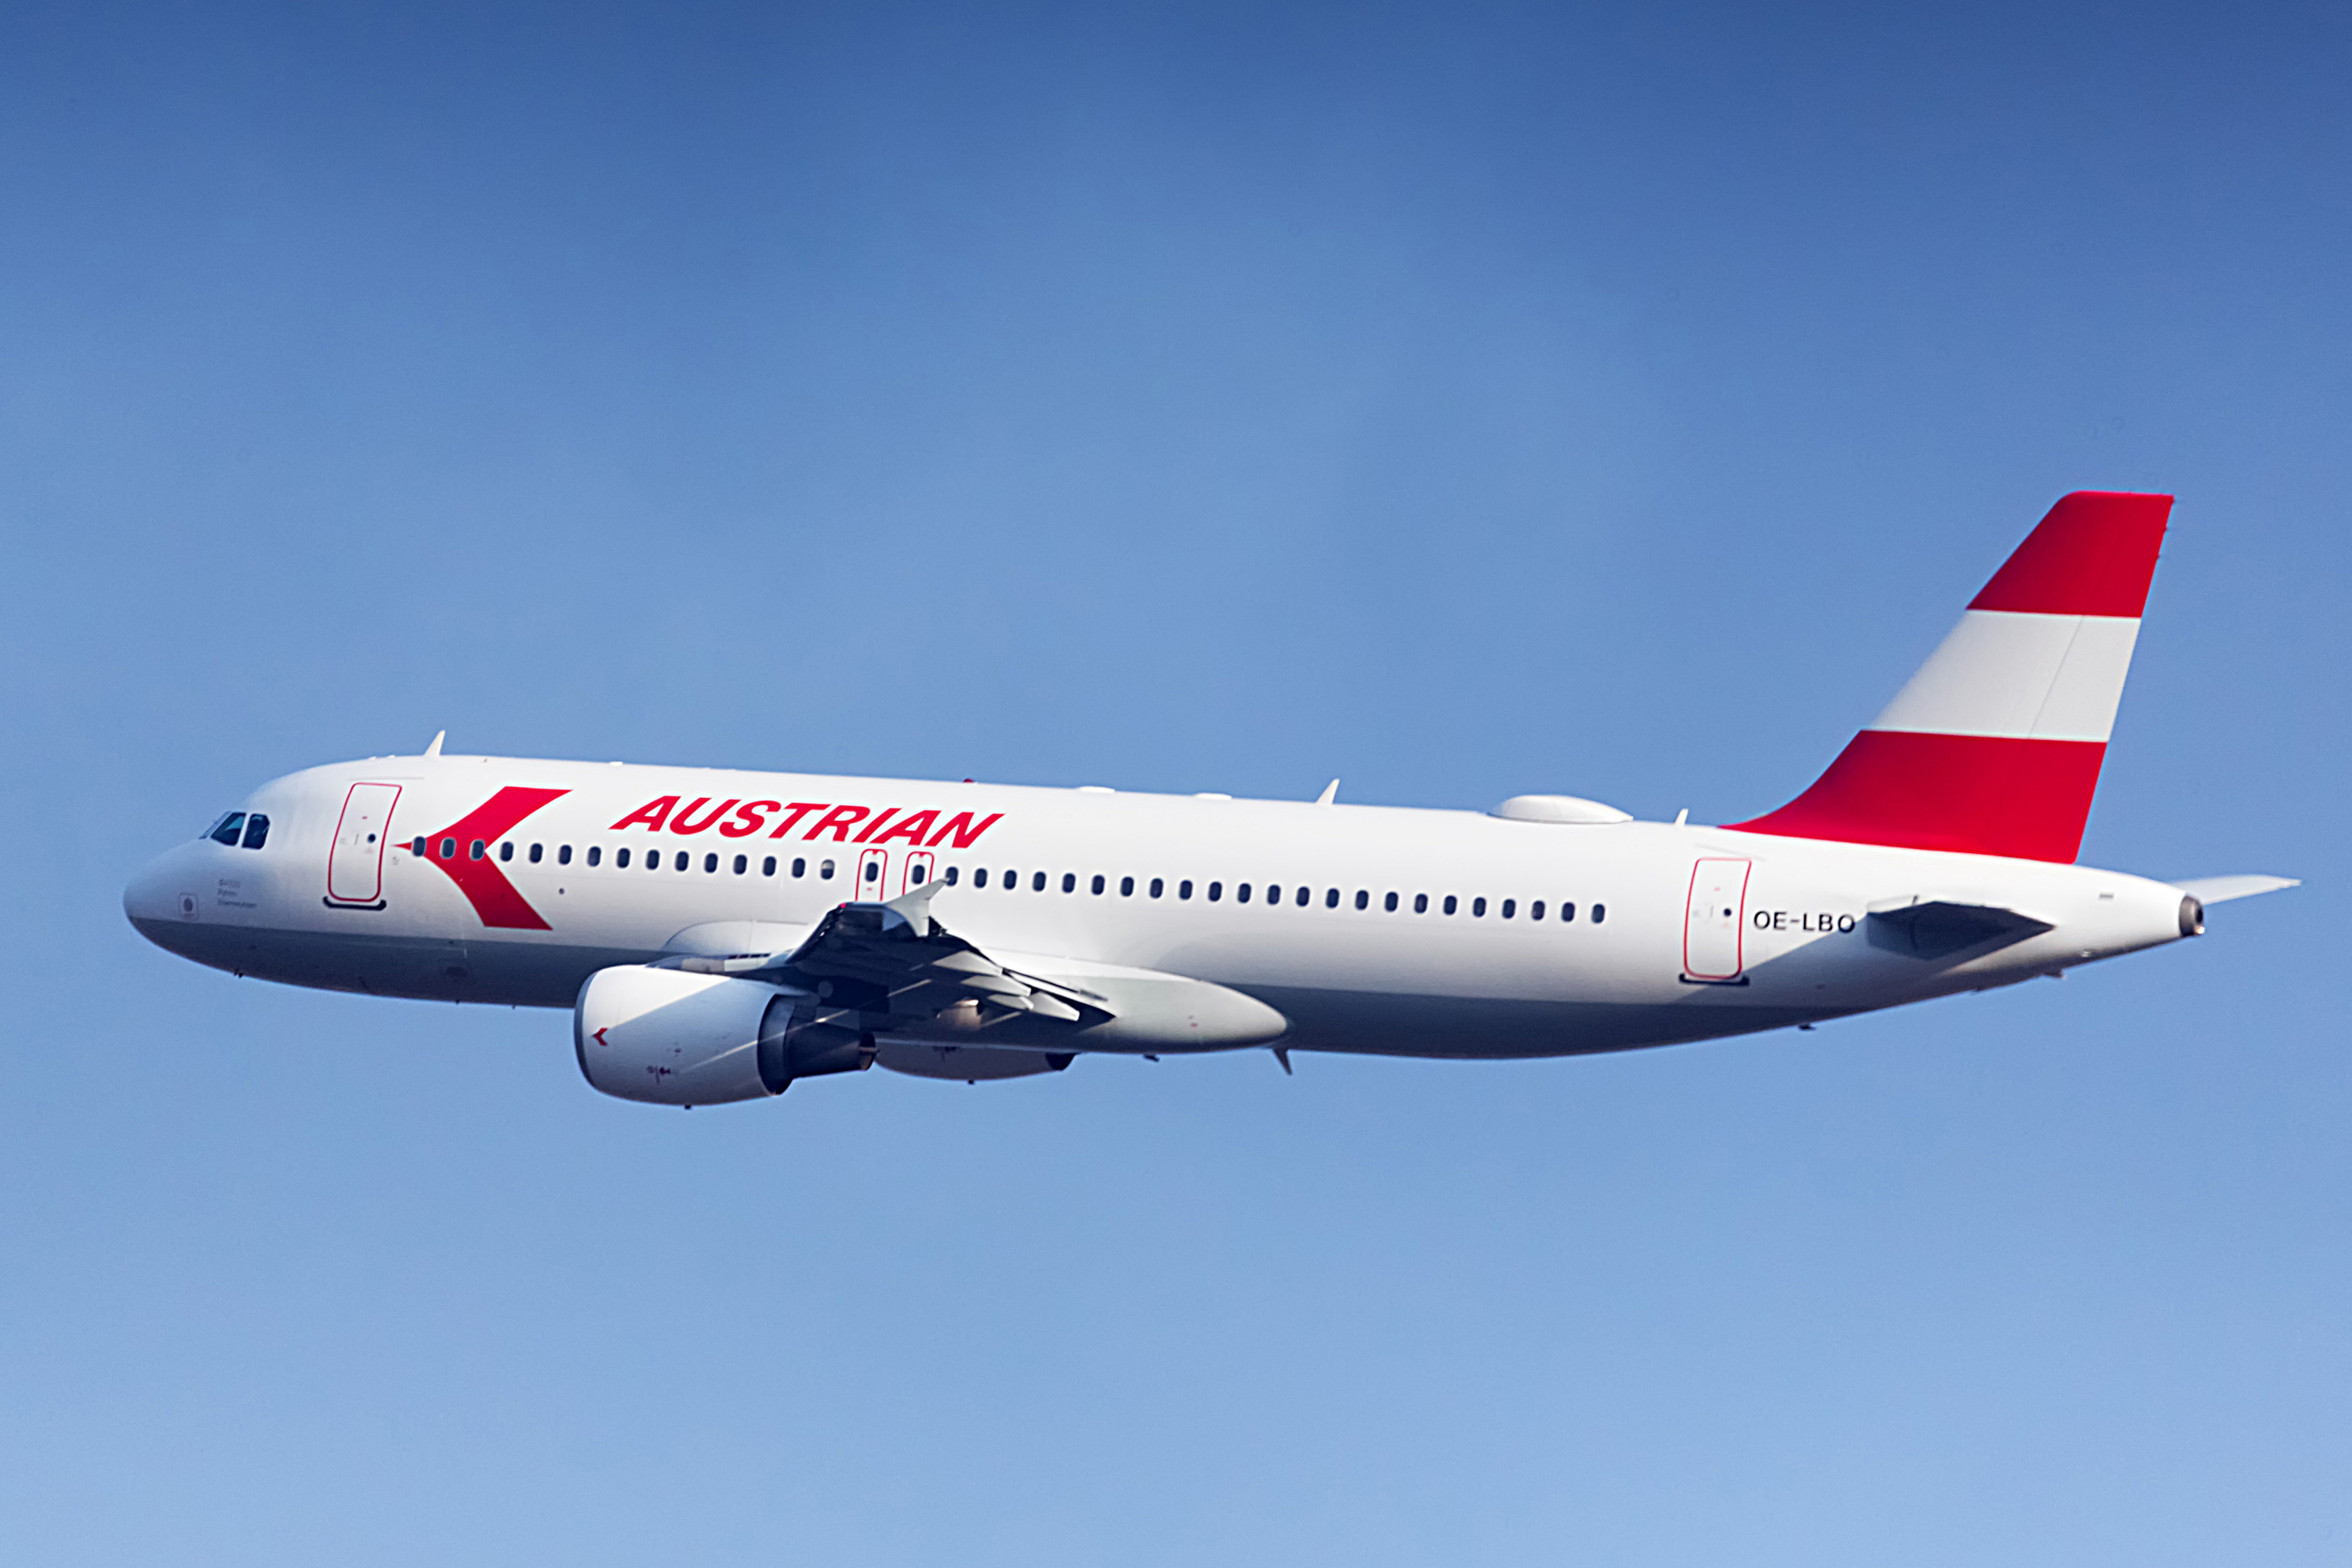 Austrian Airlines has painted one of its Airbus A320 aircraft, registration OE-LBO, with a retro look that dates back to the 1980s. Core elements of the livery are the angular chevron (logo arrow), its grey aircraft belly and the traditional red-white-red flag on the tailfin of the aircraft. Click to enlarge.